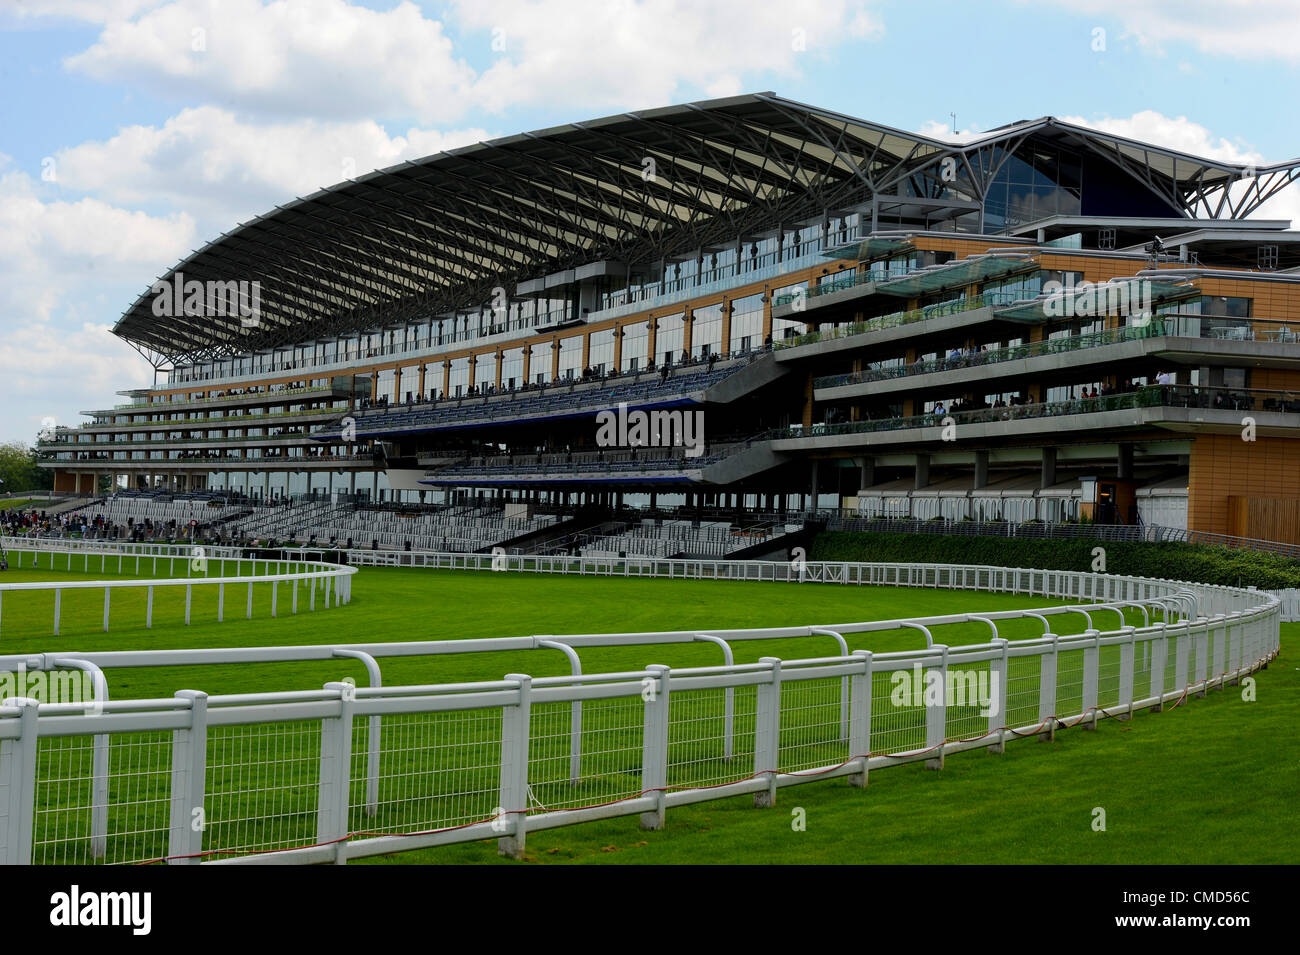 22.07.2012 Ascot, England. The Ascot Pavillion during the Ascot Betfair Weekend Featuring Property Raceday. Stock Photo